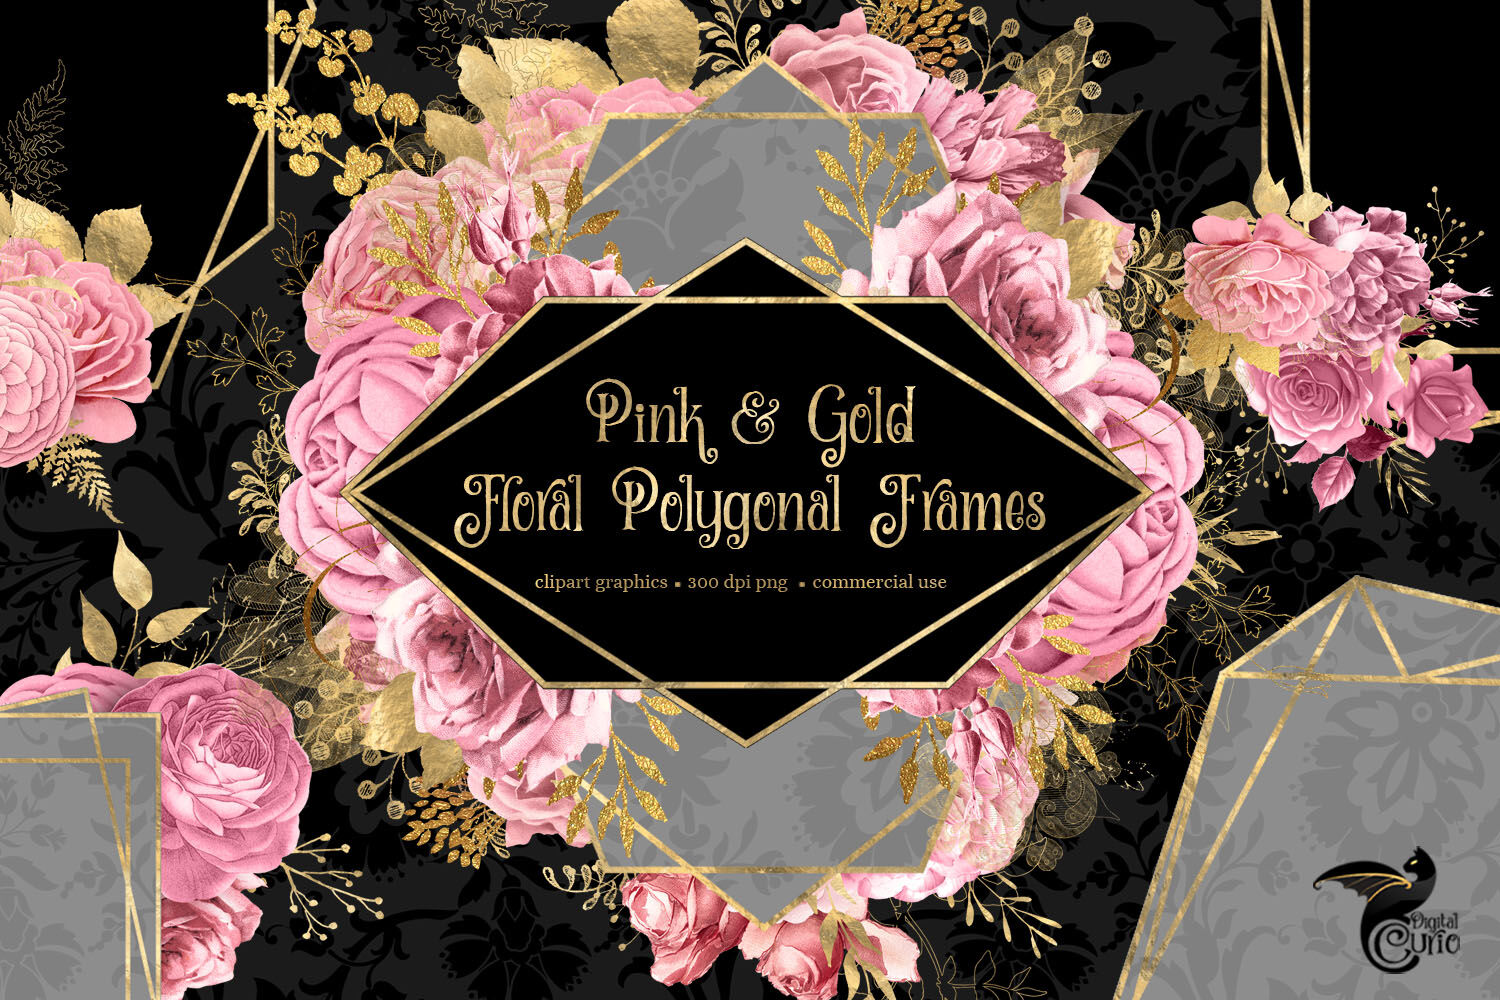 Pink and Gold Floral Polygonal Frames Clipart By Digital Curio